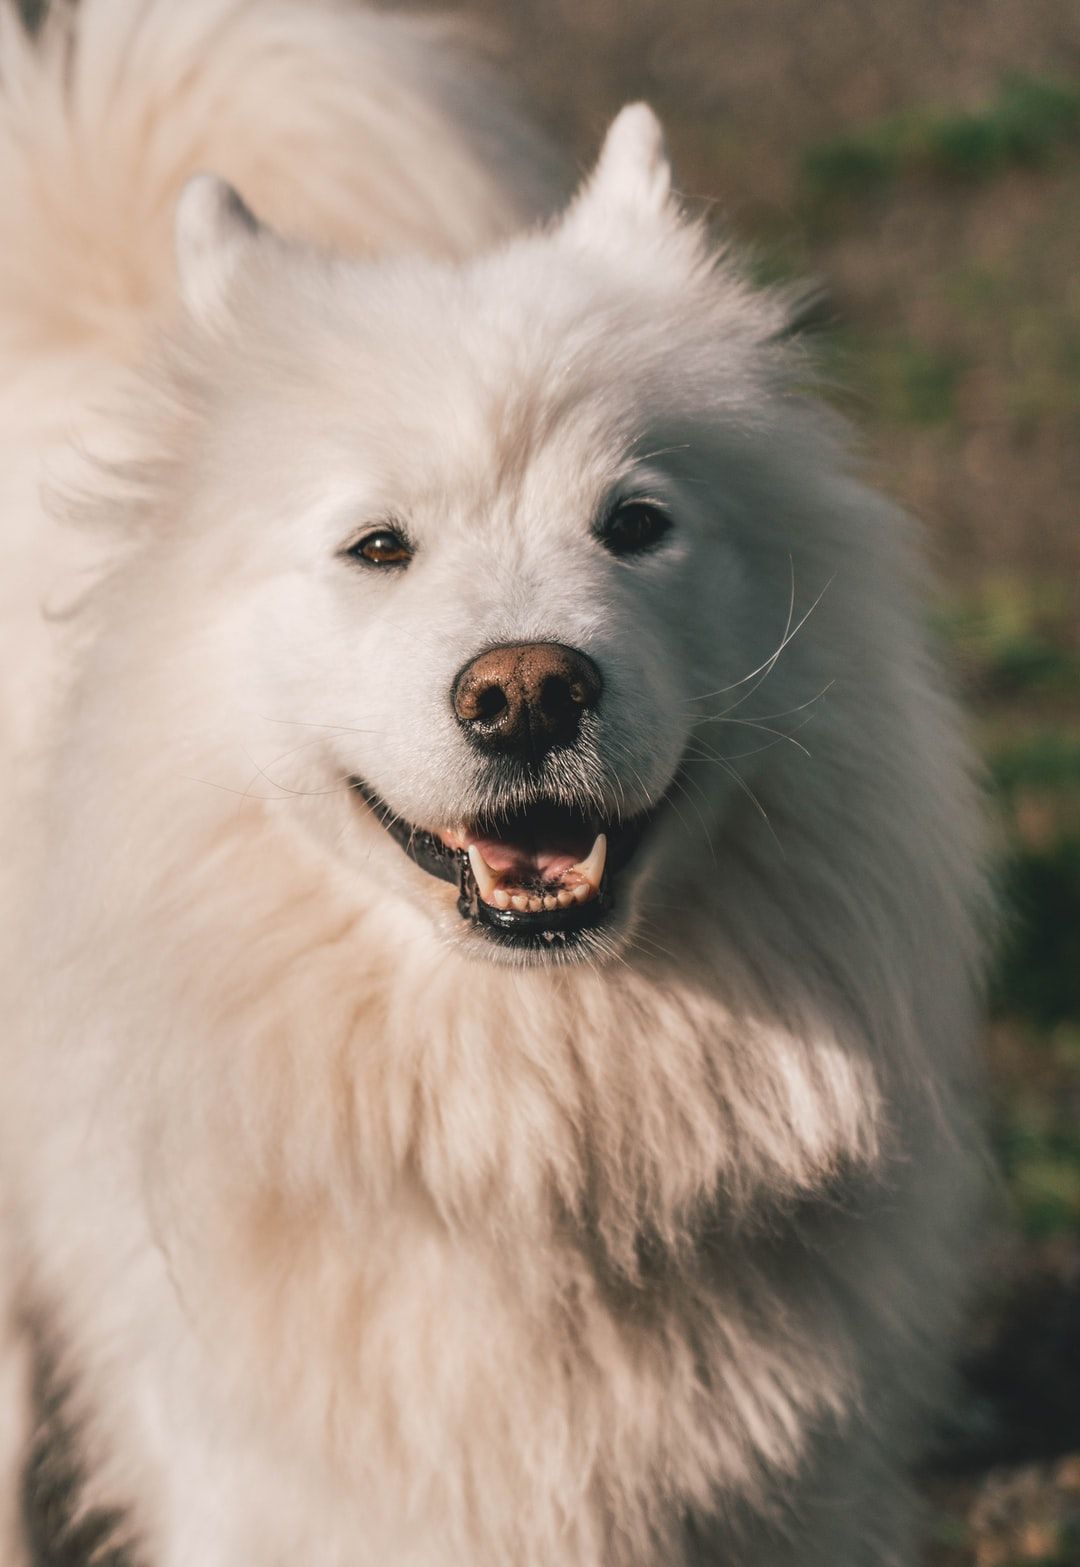 Fluffy Dog Picture. Download Free Image